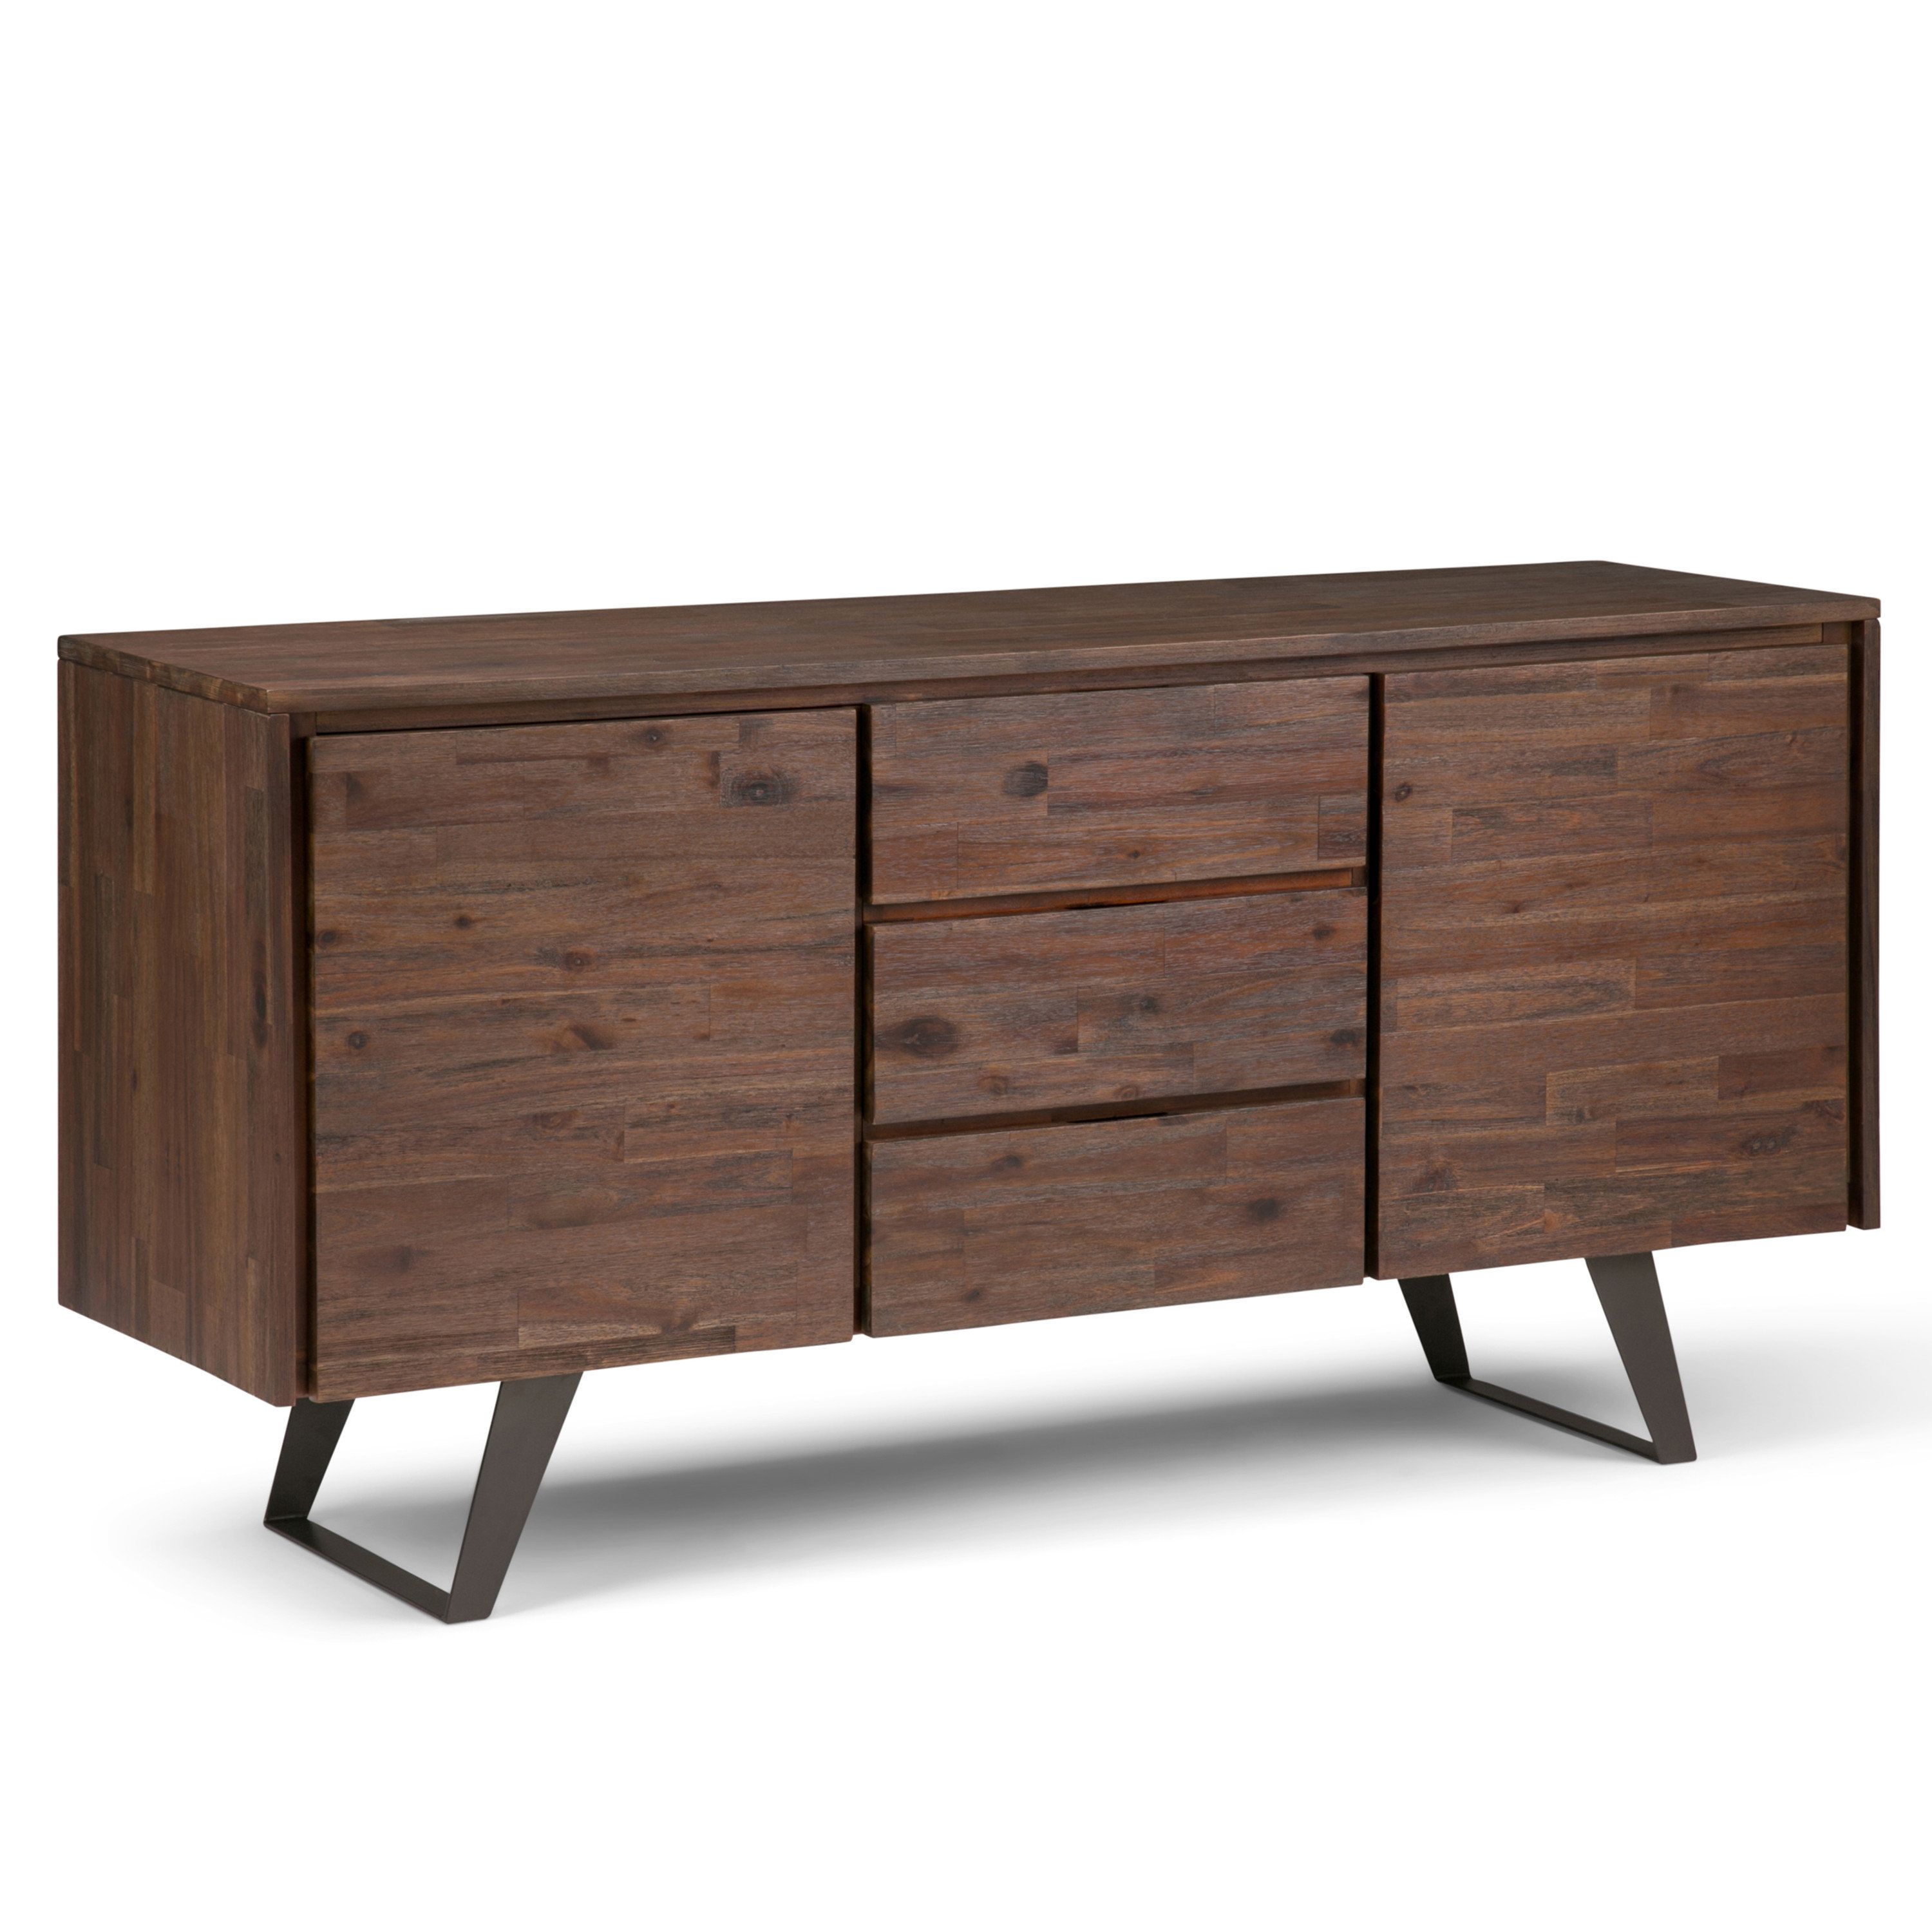 Modern & Contemporary High Gloss Sideboard | Allmodern Inside Most Popular Stennis Sideboards (View 14 of 20)